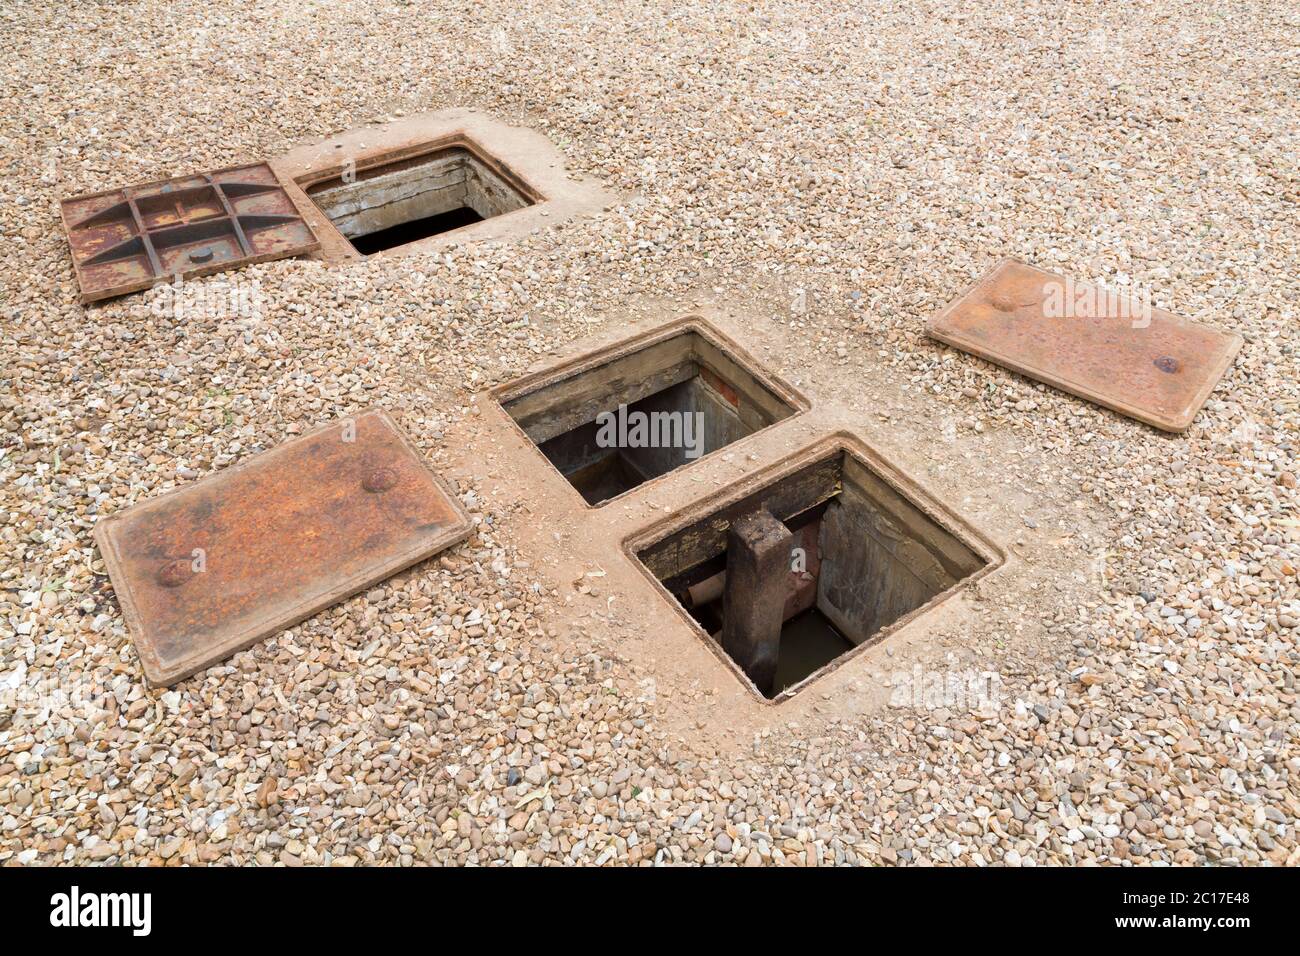 Inspecting an underground septic tank or rainwater system with open manhole cover, UK Stock Photo